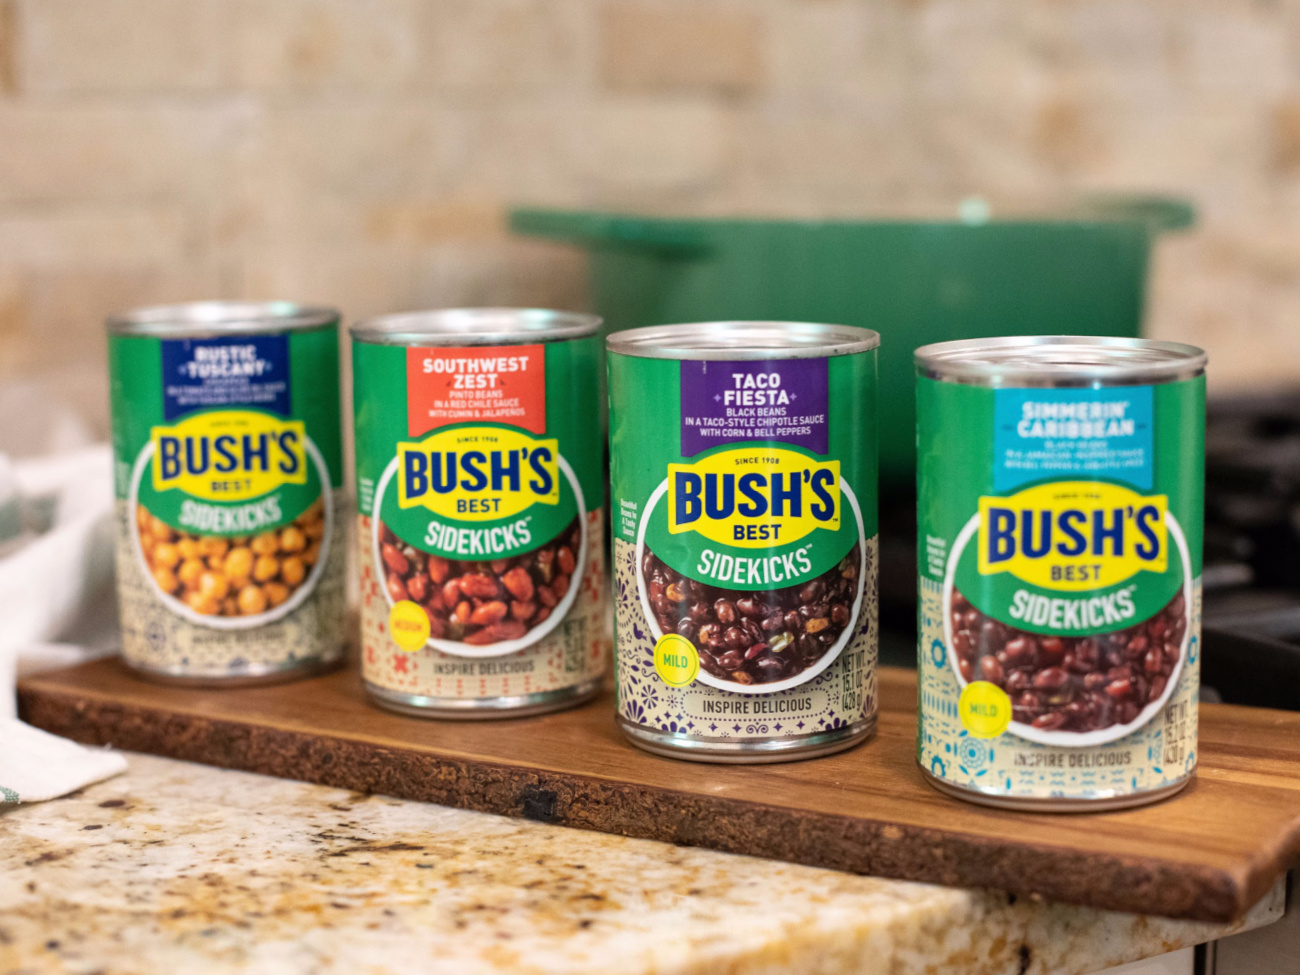 Add Some Zhuzh To Your Next Meal With Bush’s Sidekicks – Save Now At Publix